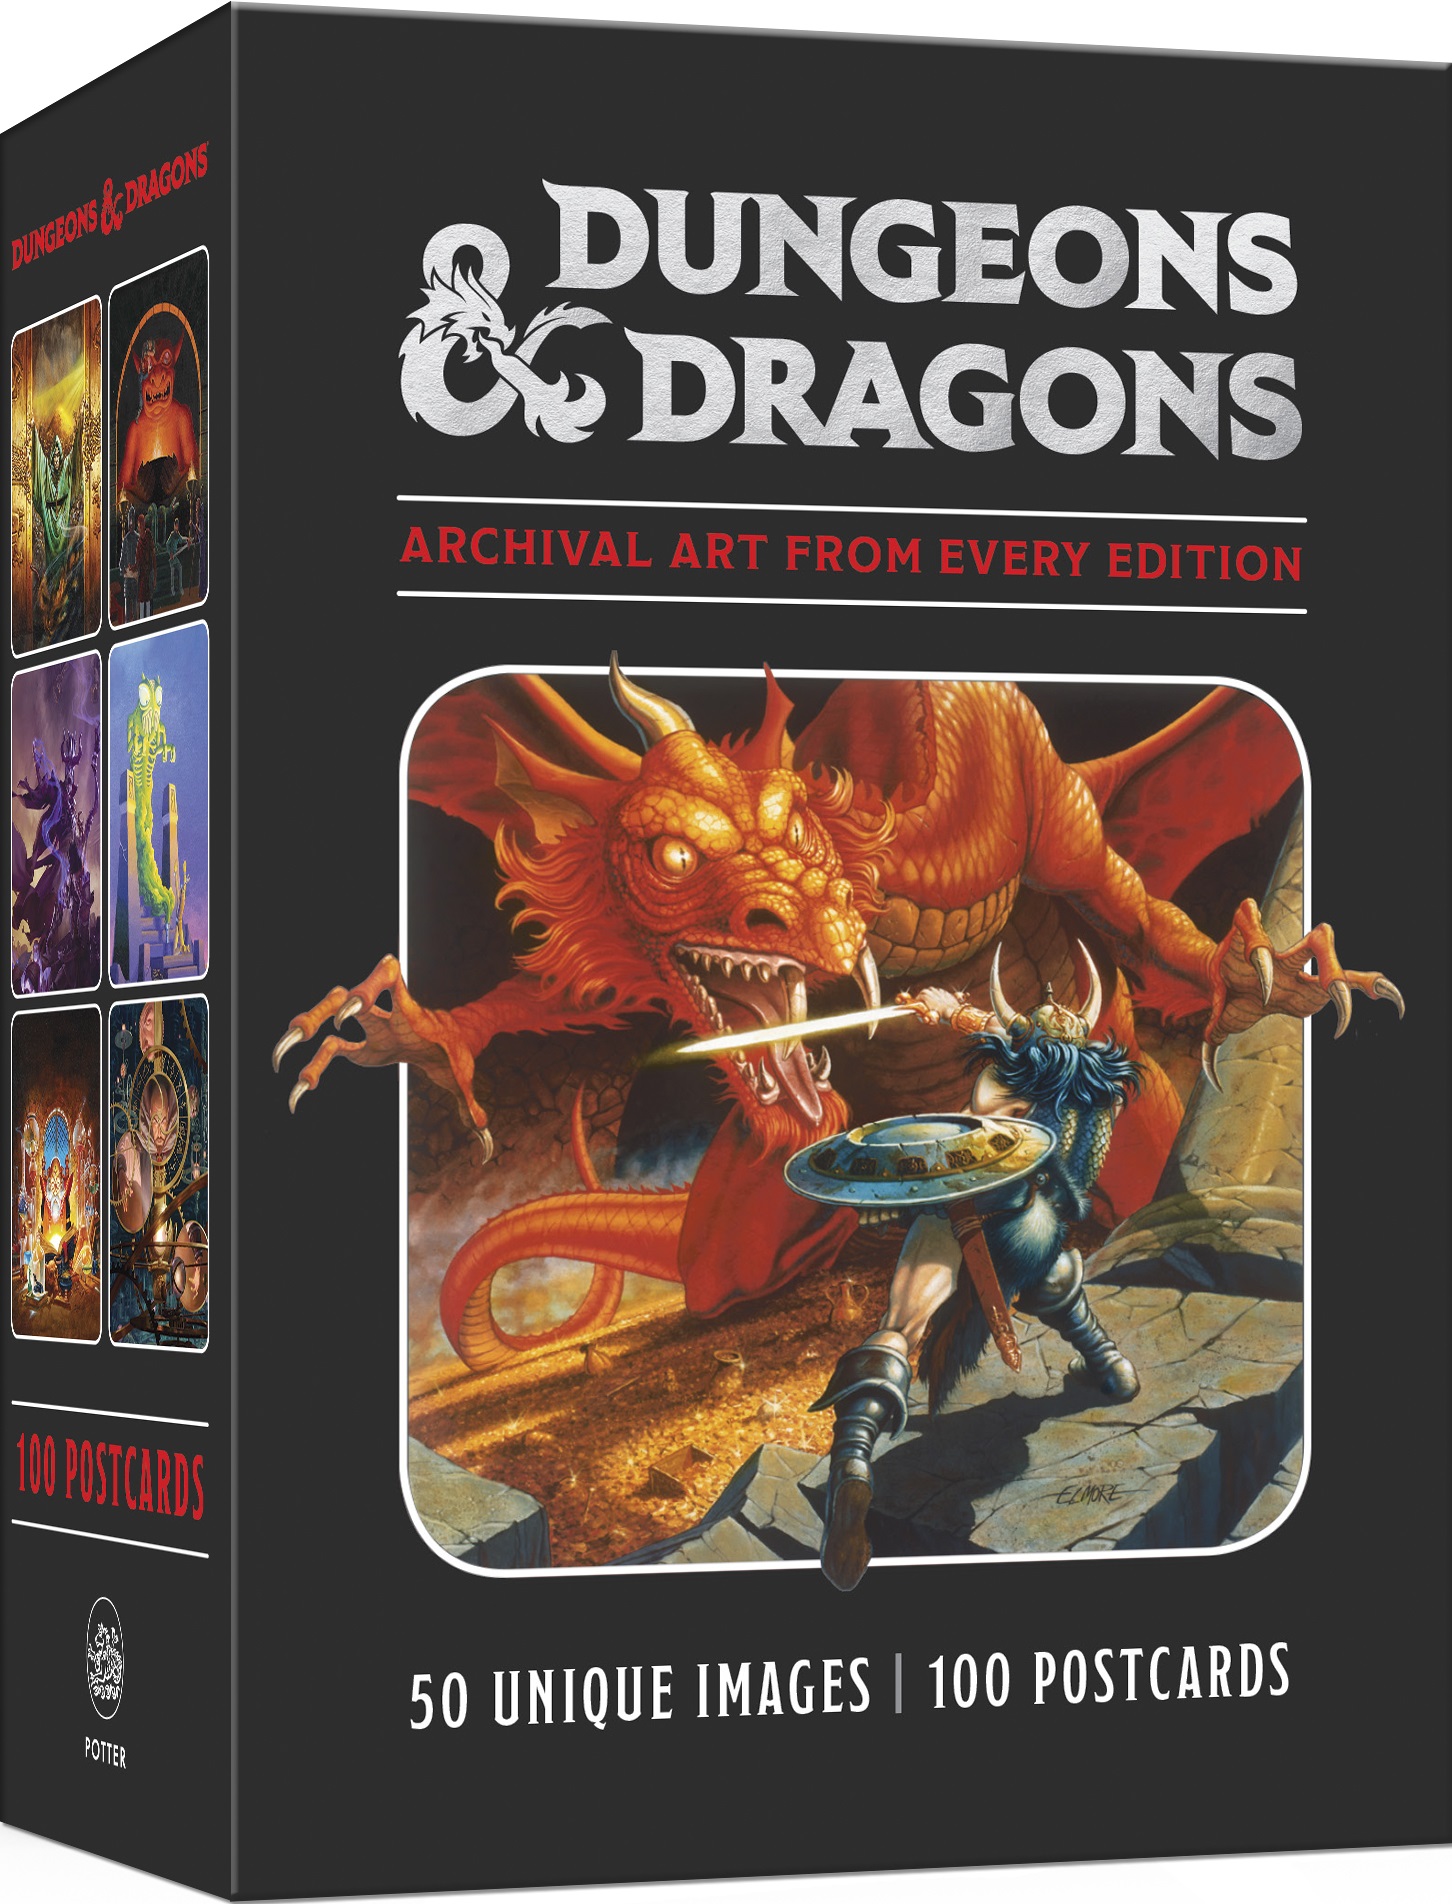 Dungeons & Dragons: Postcards: Archival Art From Every Edition 